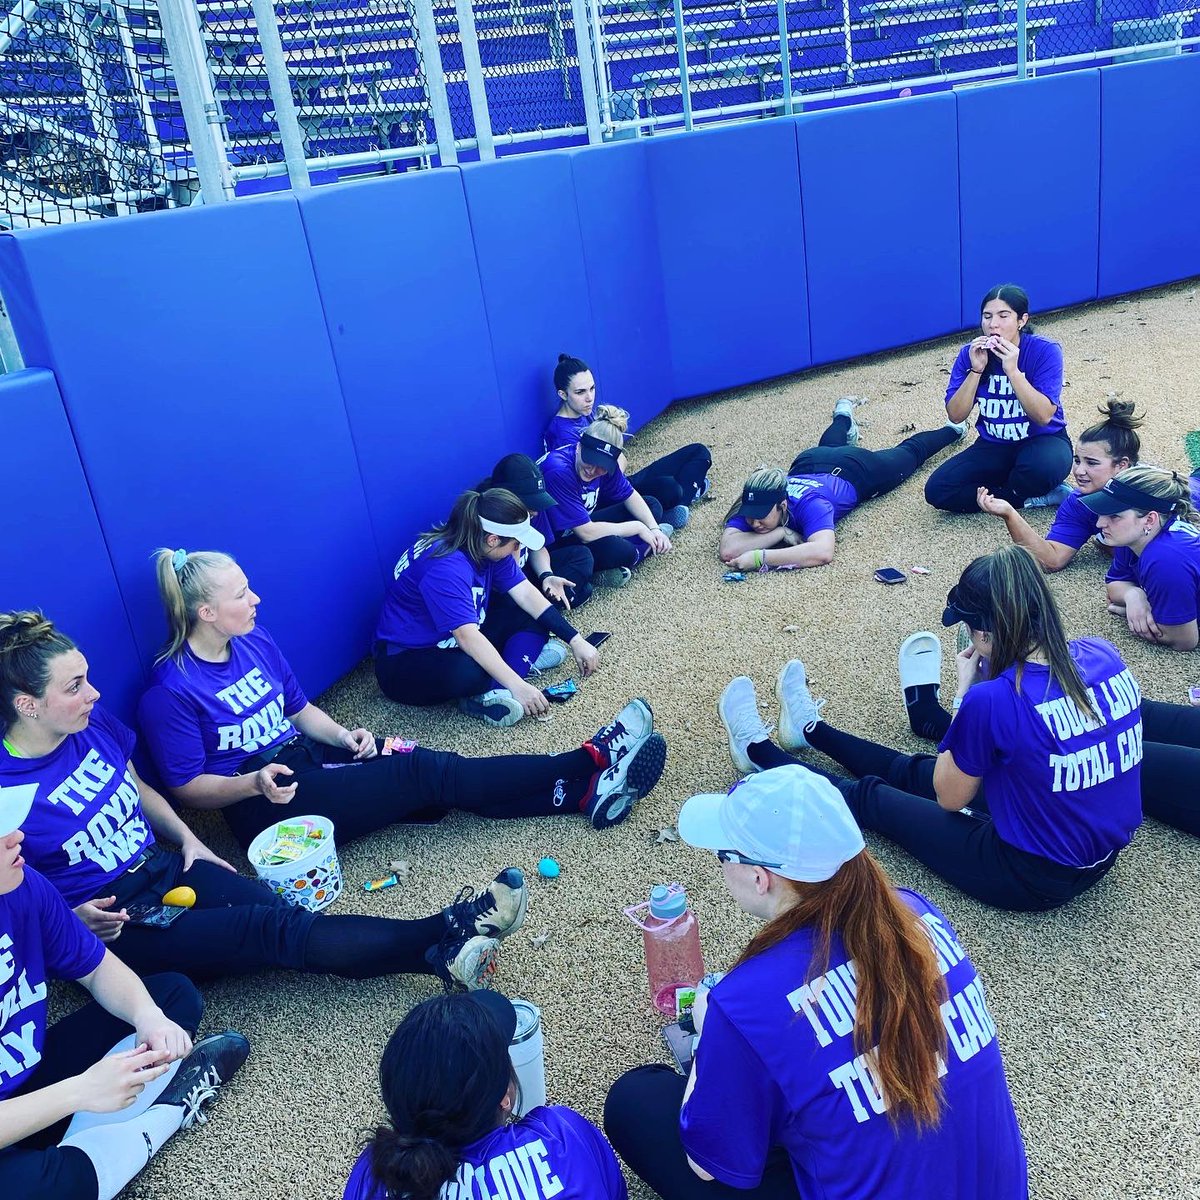 Our 2nd annual Easter egg hunt with @UofS_Baseball was a success!! It was a little late due to a new addition to the roster (Baby Hayden) but we love candy and competition. #easteregghunt #scrantonsoftball #royalstrong #easterfun #softballbeatbaseball #wewillrunforcandy